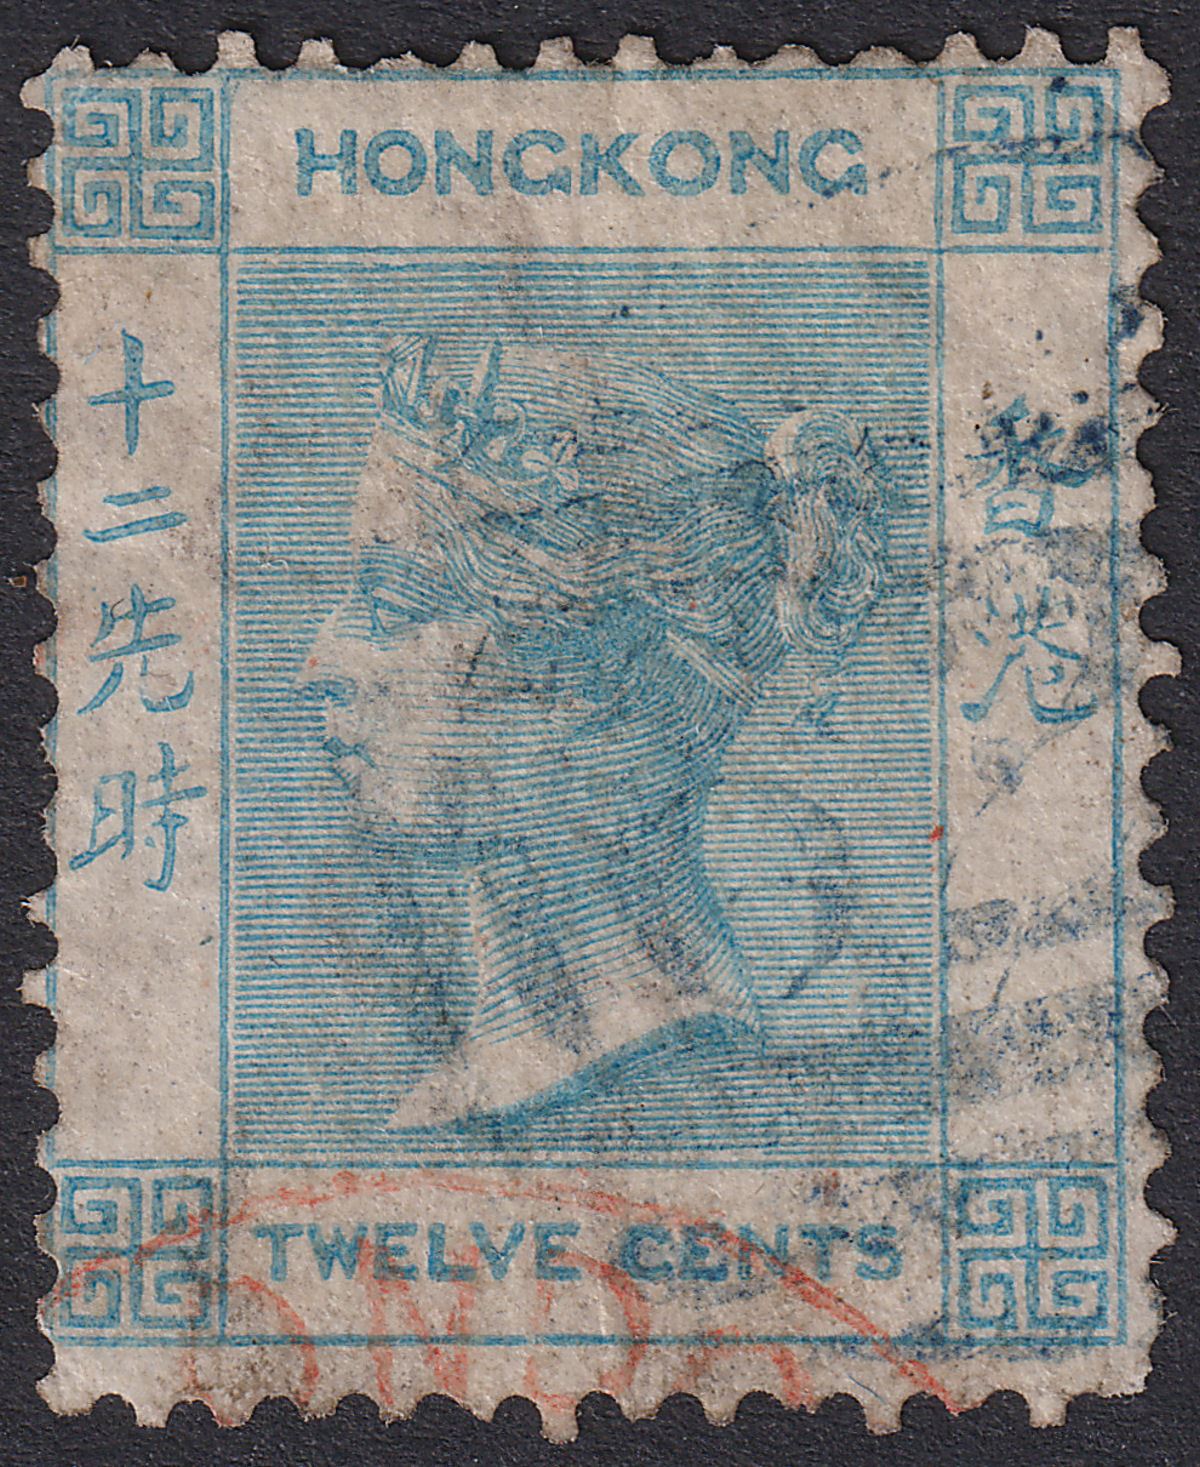 Hong Kong 1865 QV 12c Pale Greenish Blue Used SG12 with 62B + red London Marks